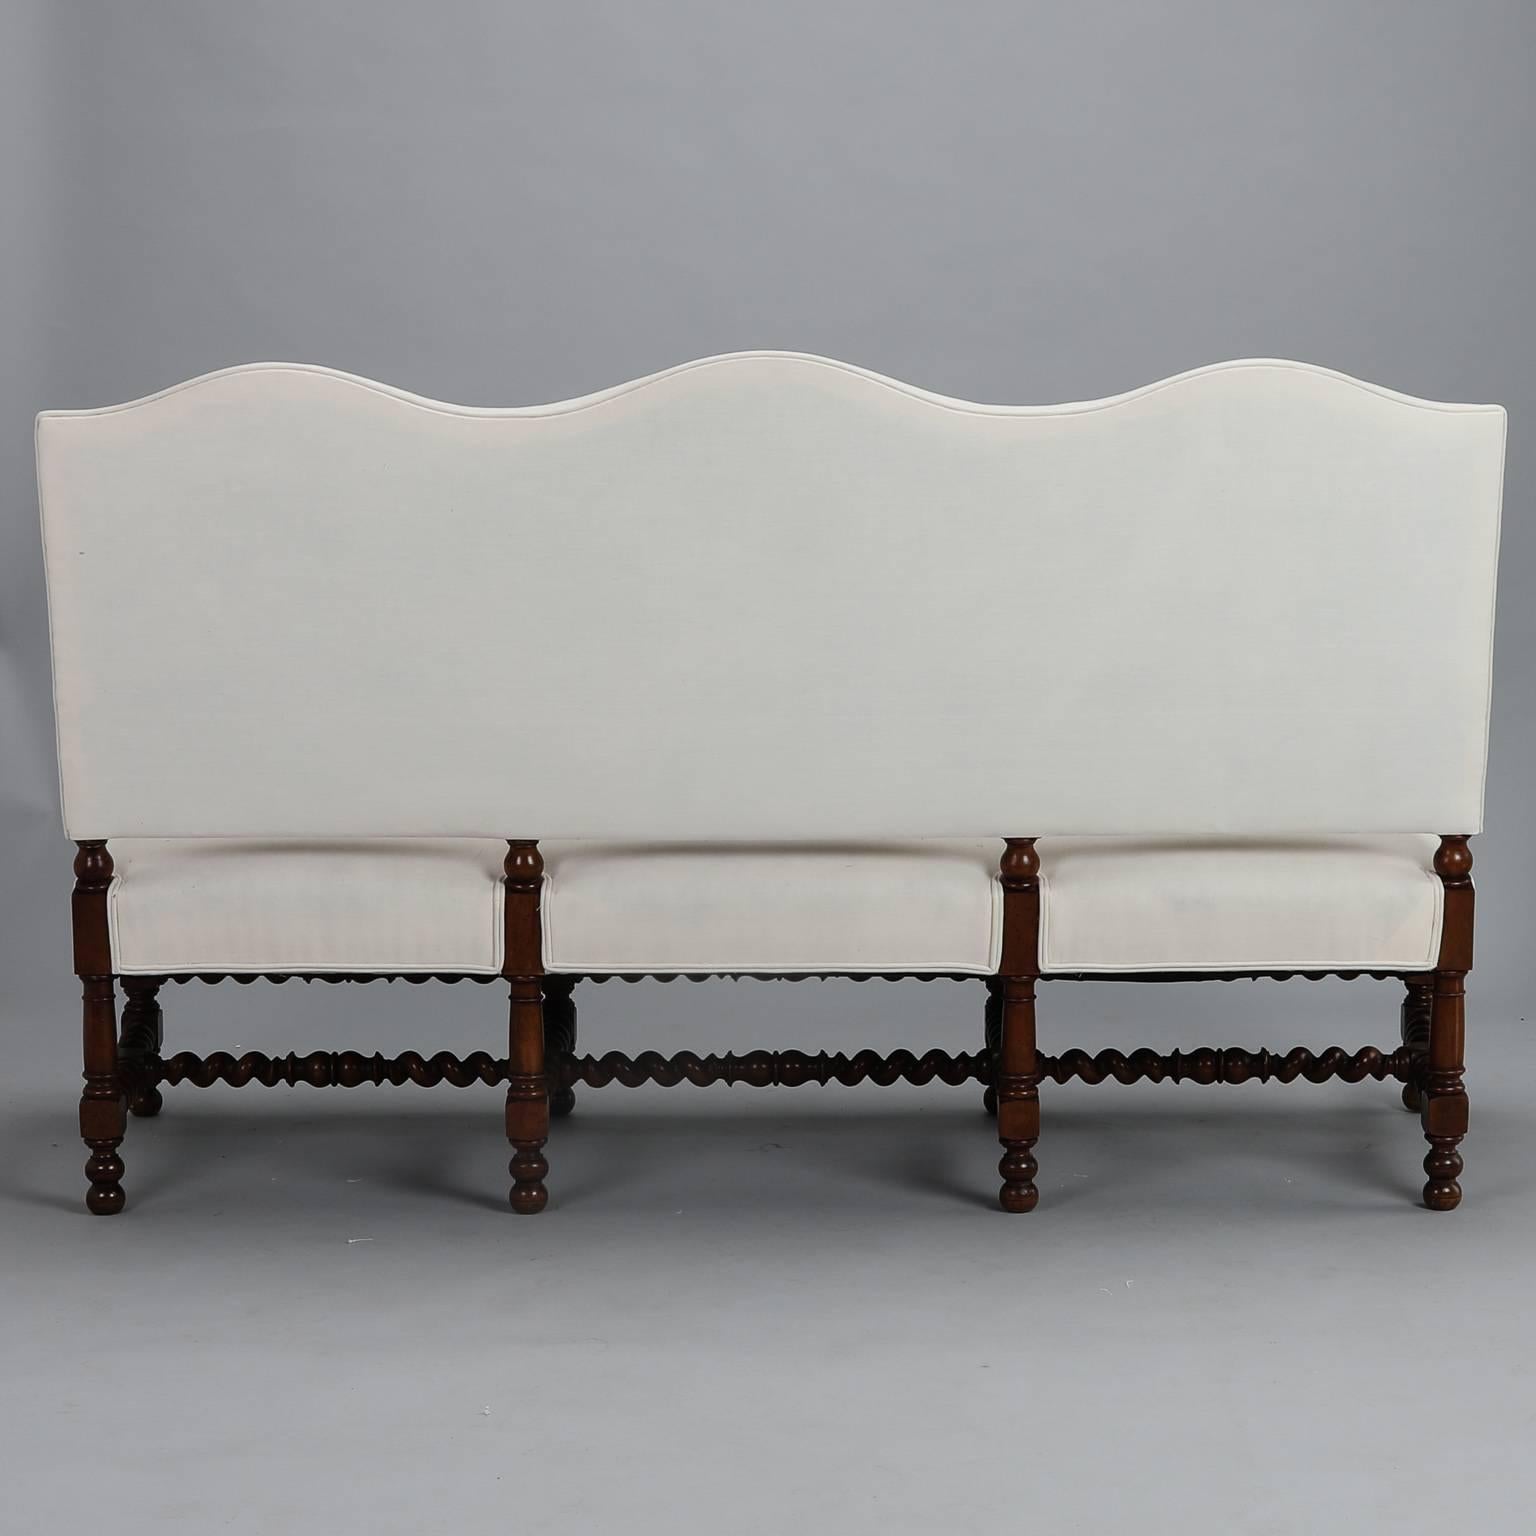 Late 19th century French camel back settee has a dark wood barley twist frame with double rail front stretcher, eight legs and upholstered arms. Newly covered in muslin, this piece is ready for the fabric of your choice. Arms are 27” high and seat